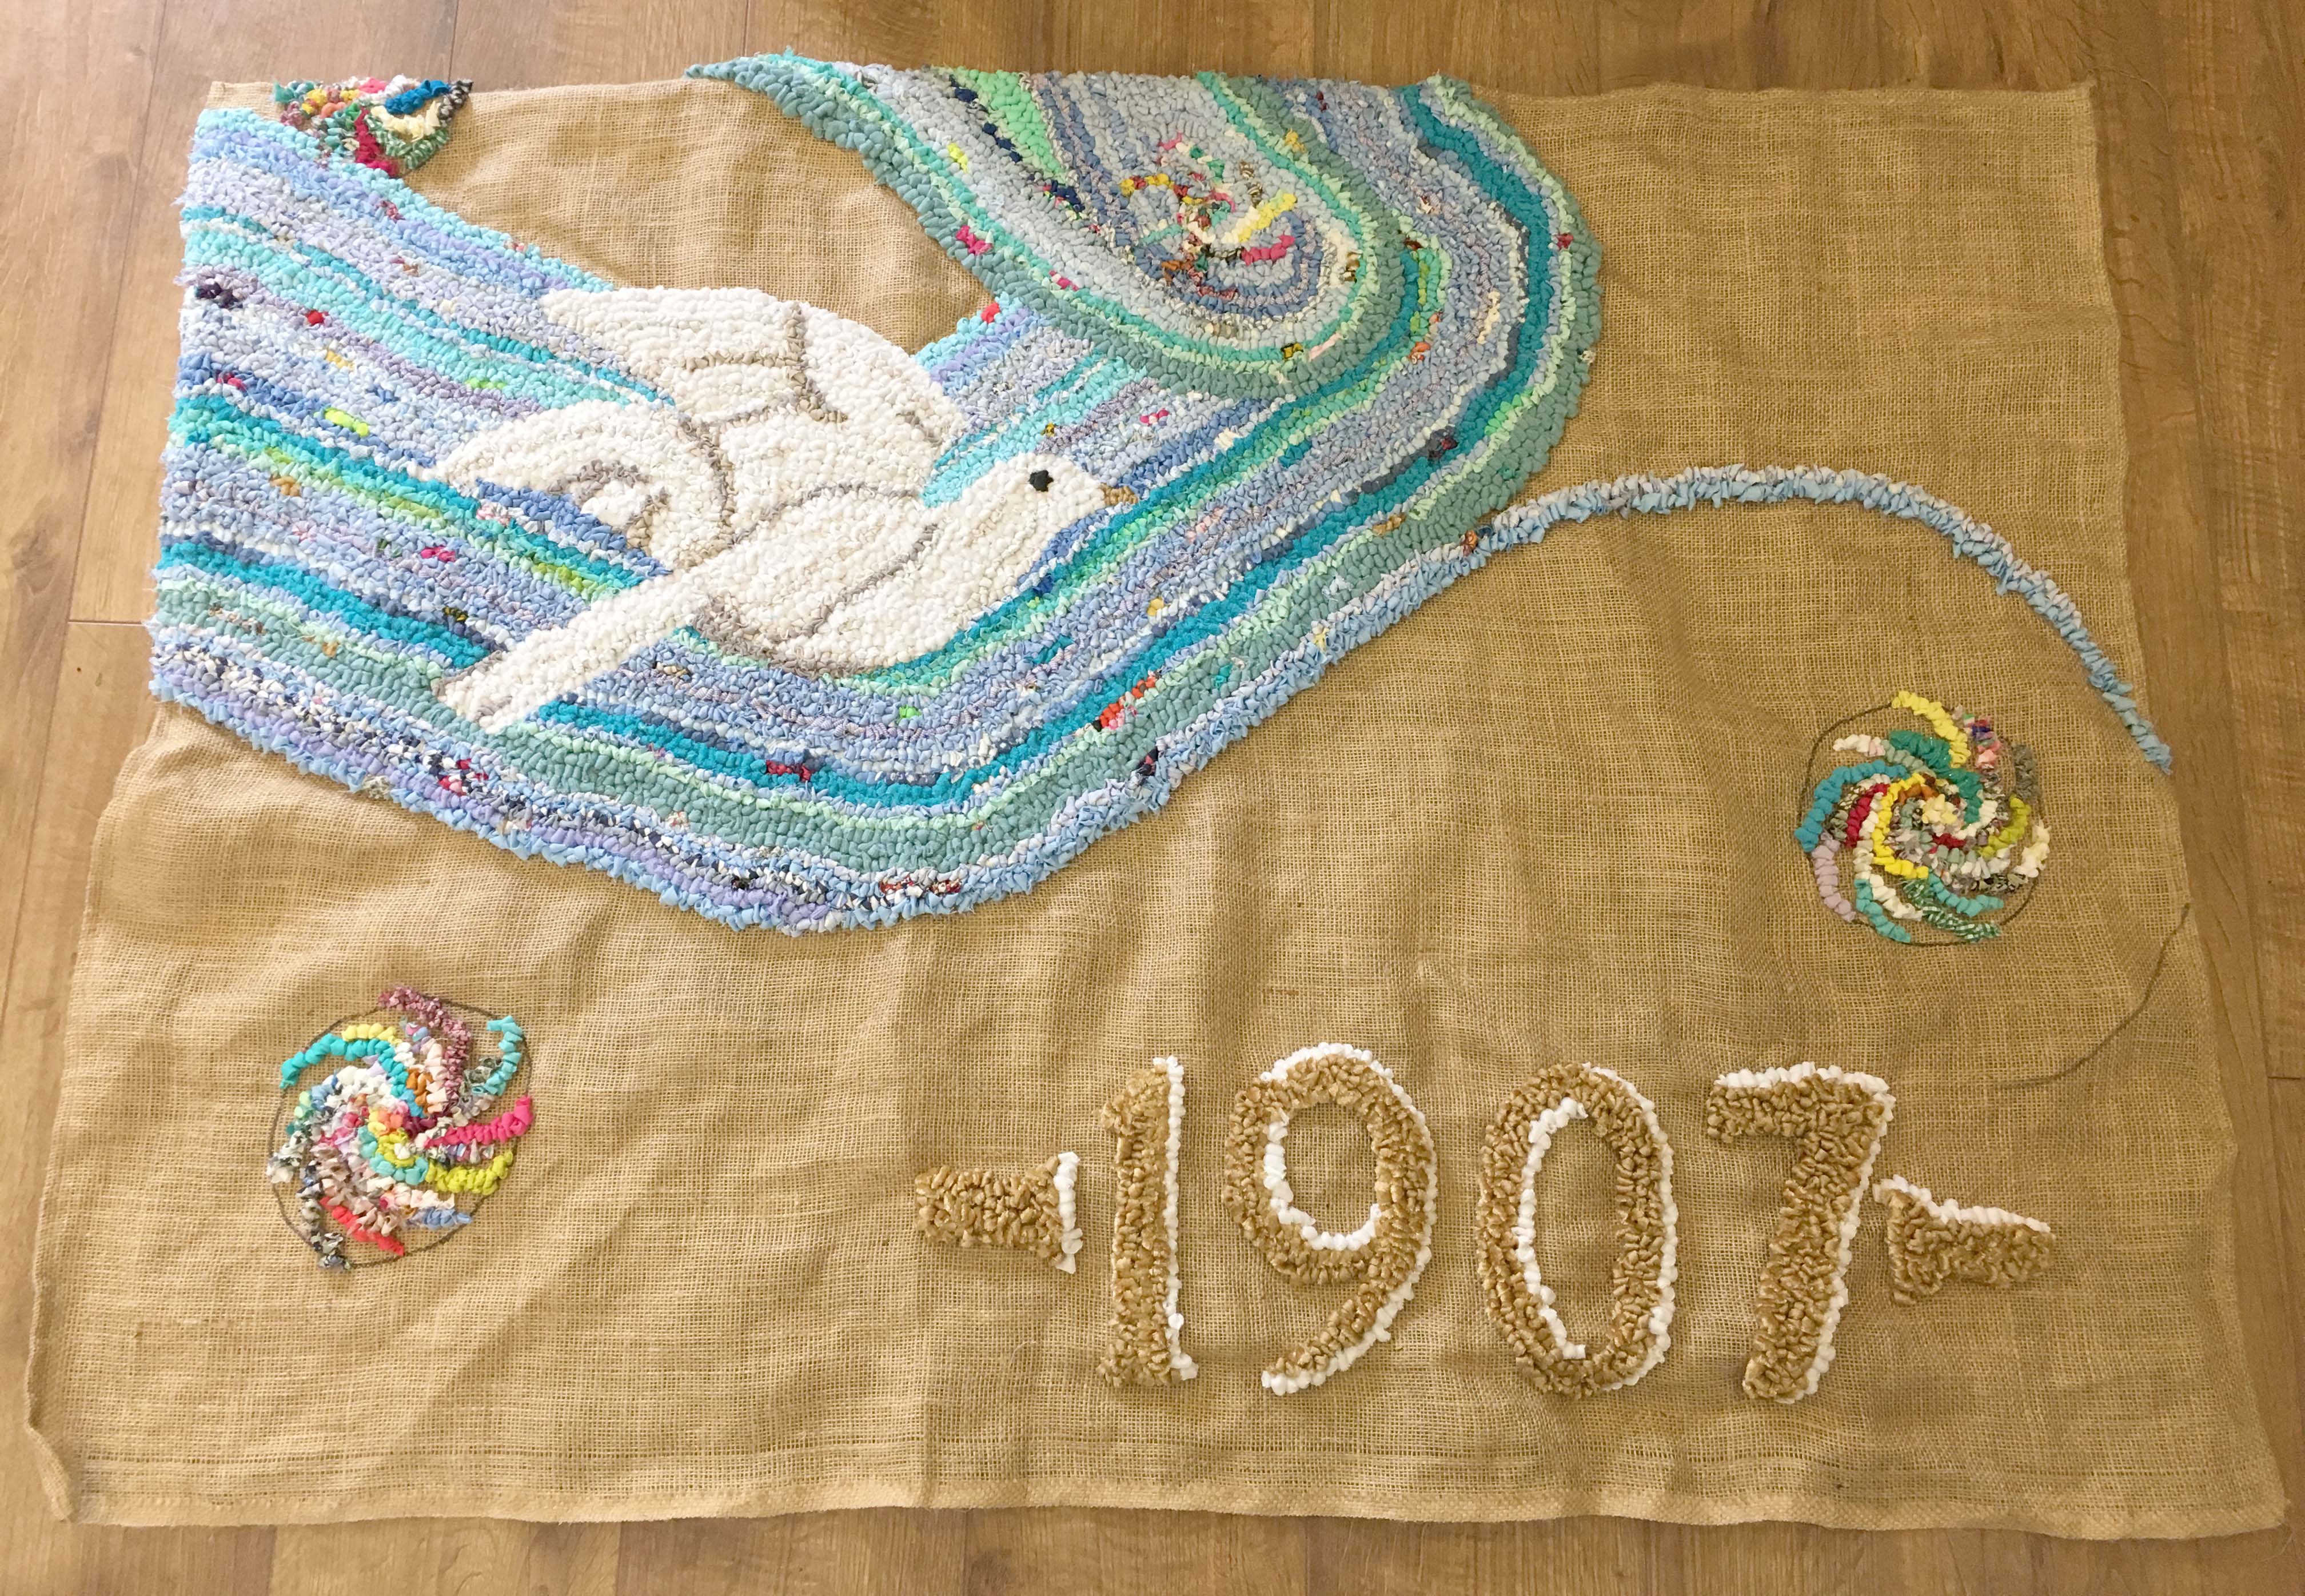 Creating a piece of rag rug art using old clothing and fabric offcuts